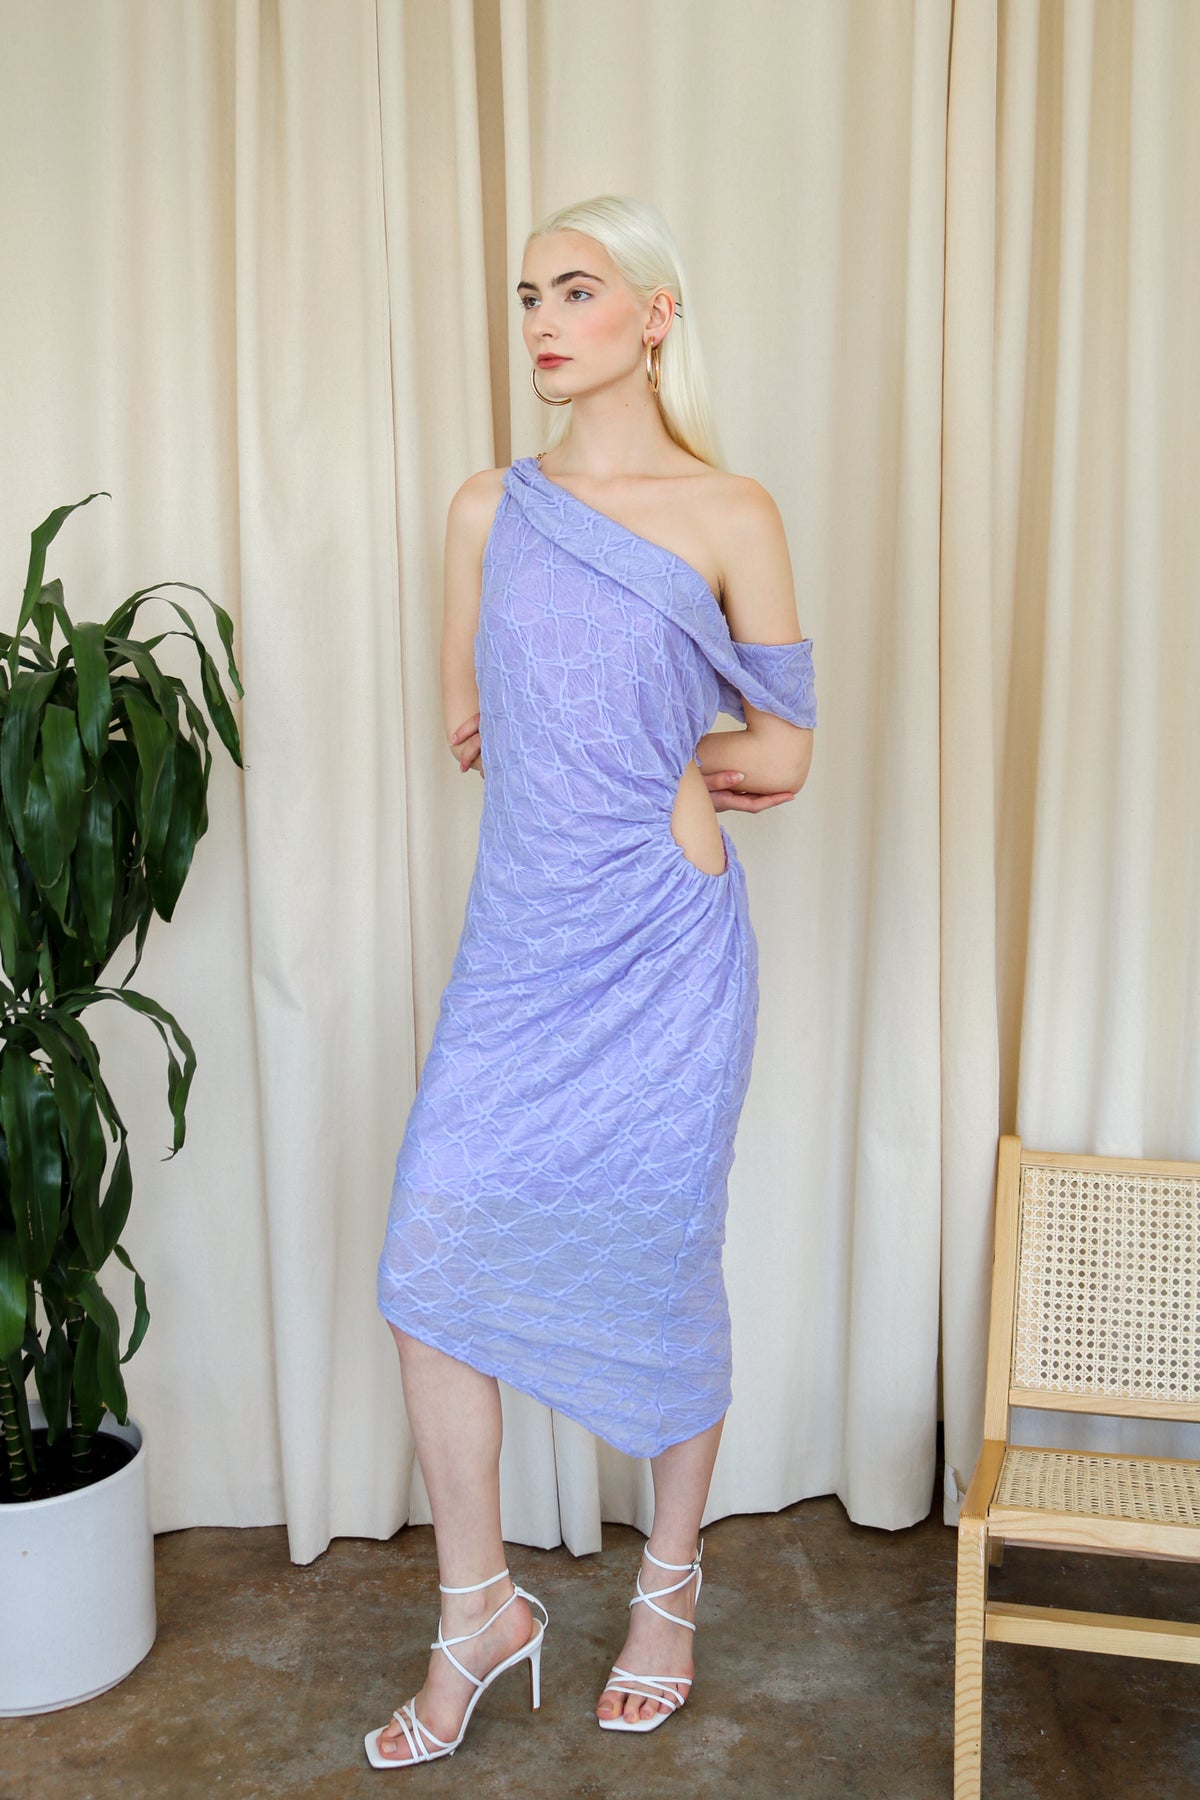 Model wearing a purple one-shoulder textured midi dress, standing beside a plant and a white cushioned chair.